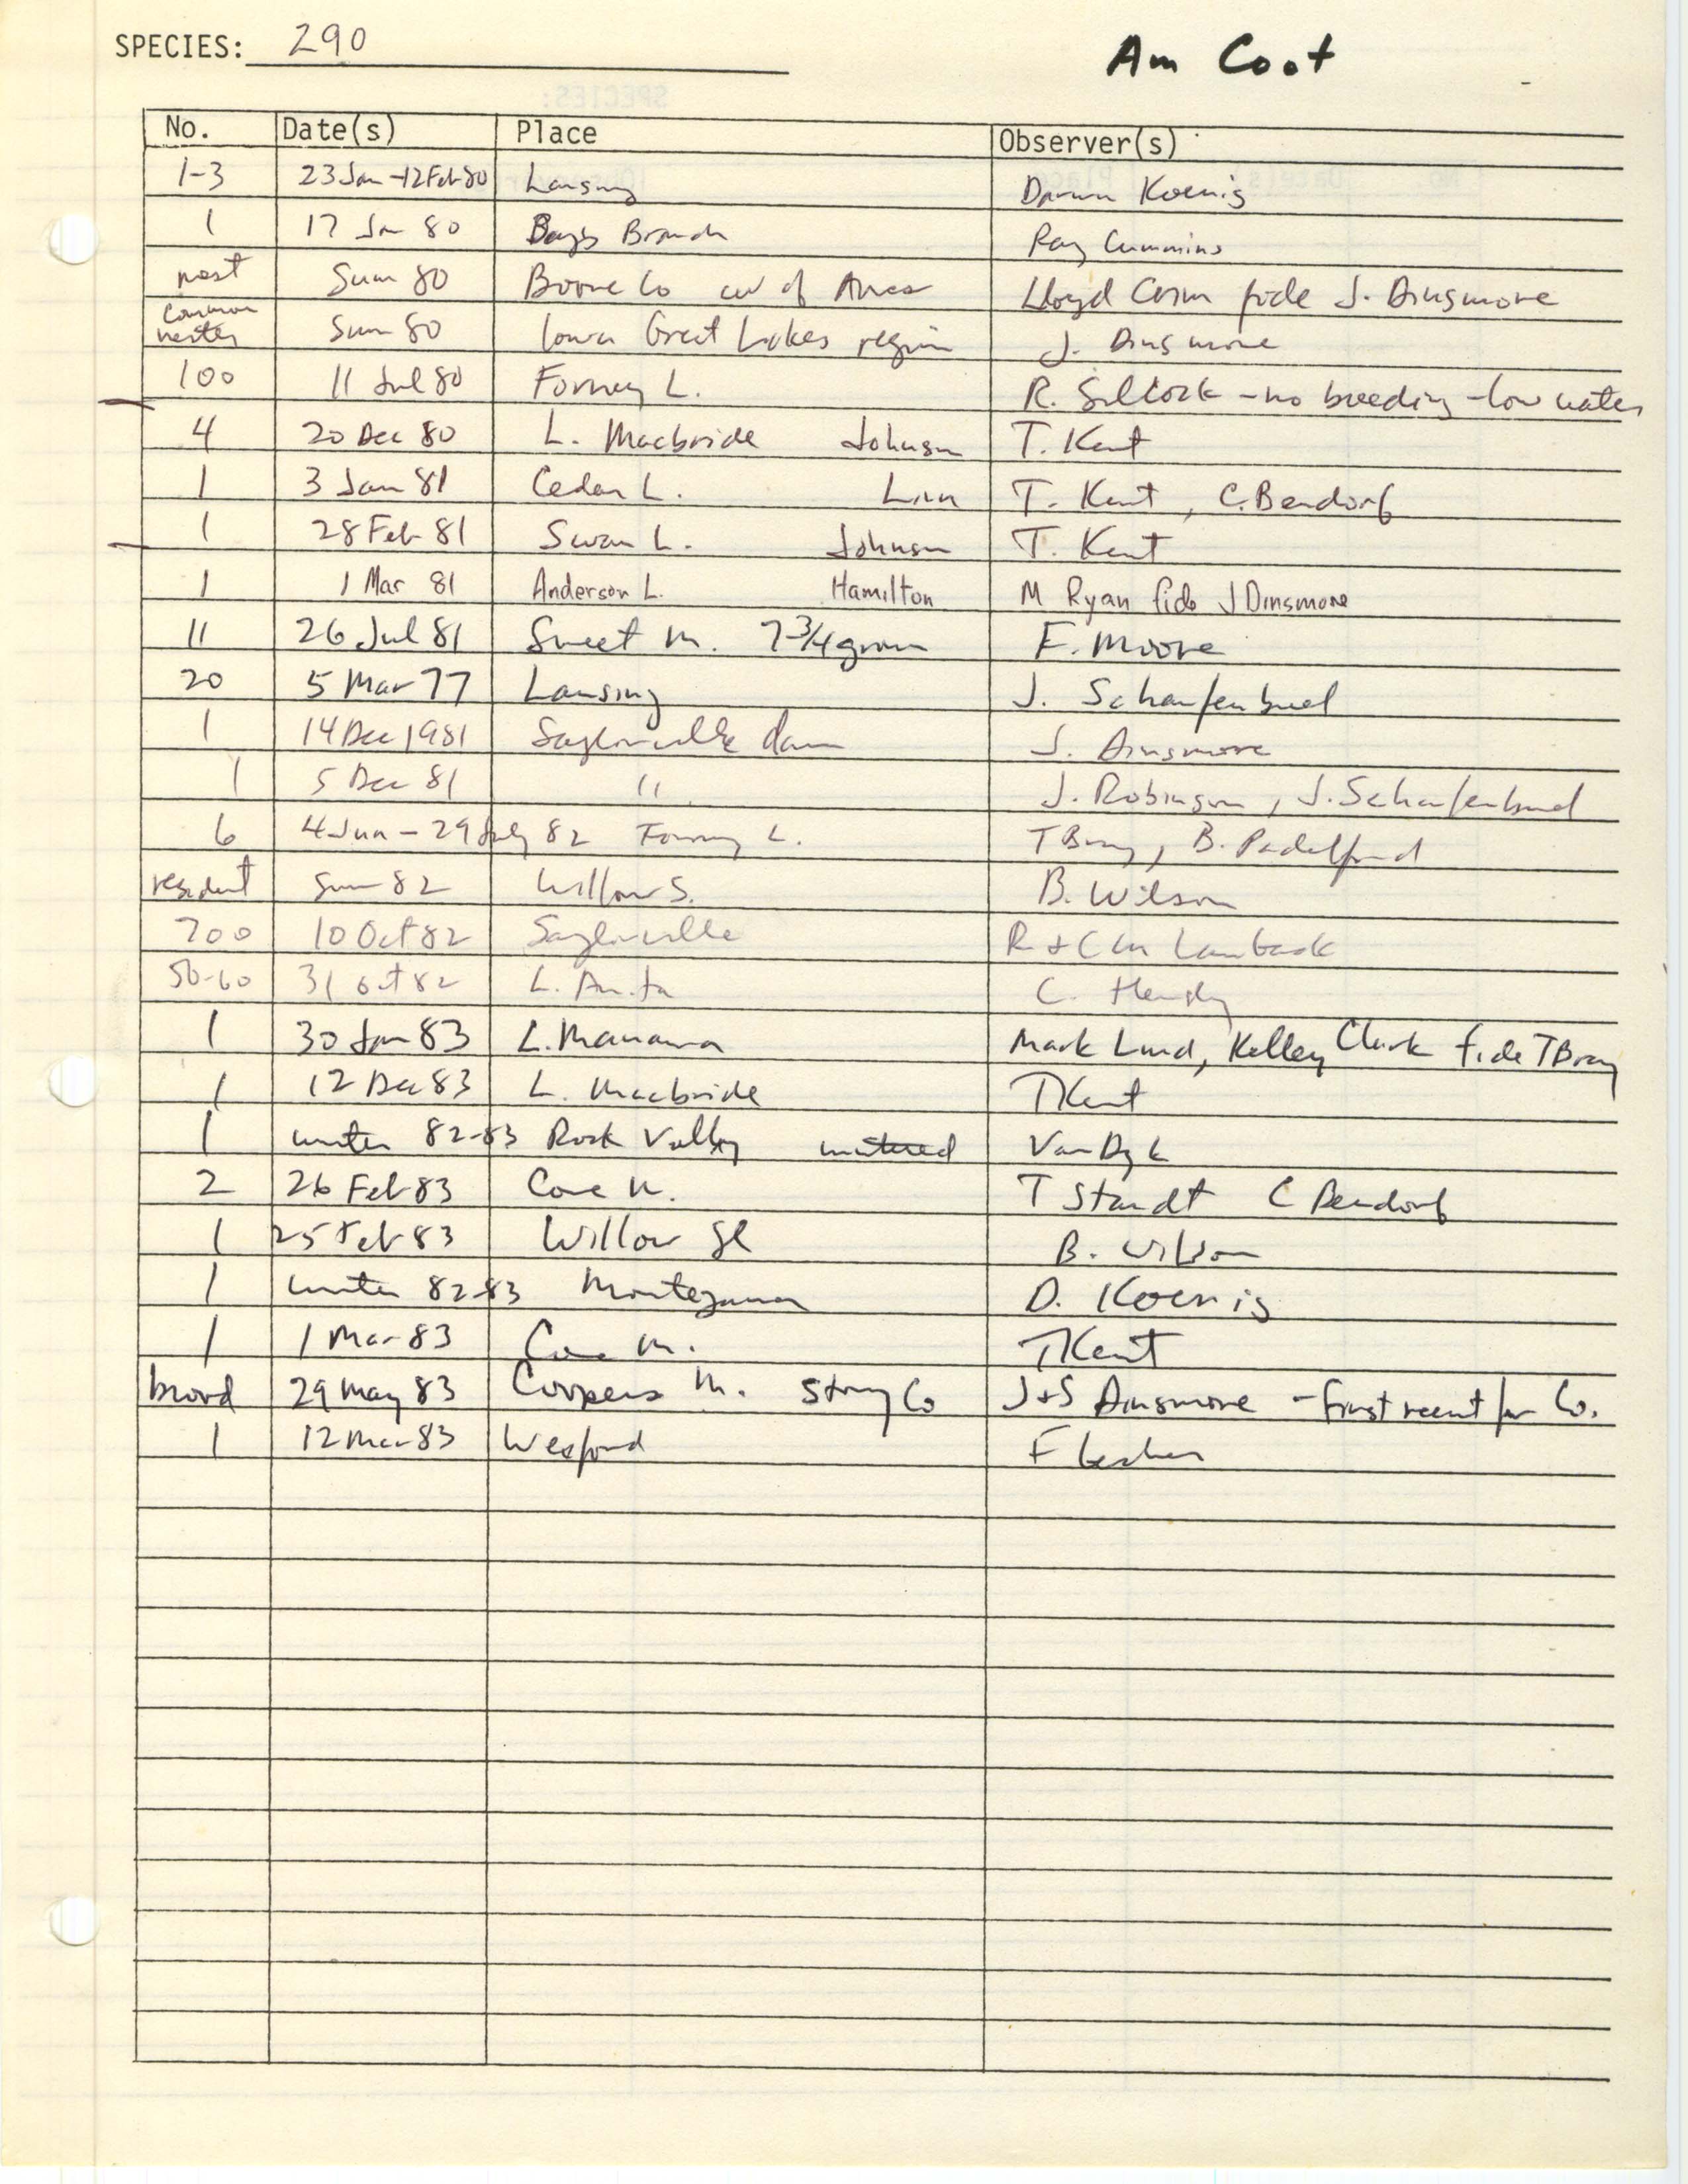 Iowa Ornithologists' Union, field report compiled data, American Coot, 1977-1983